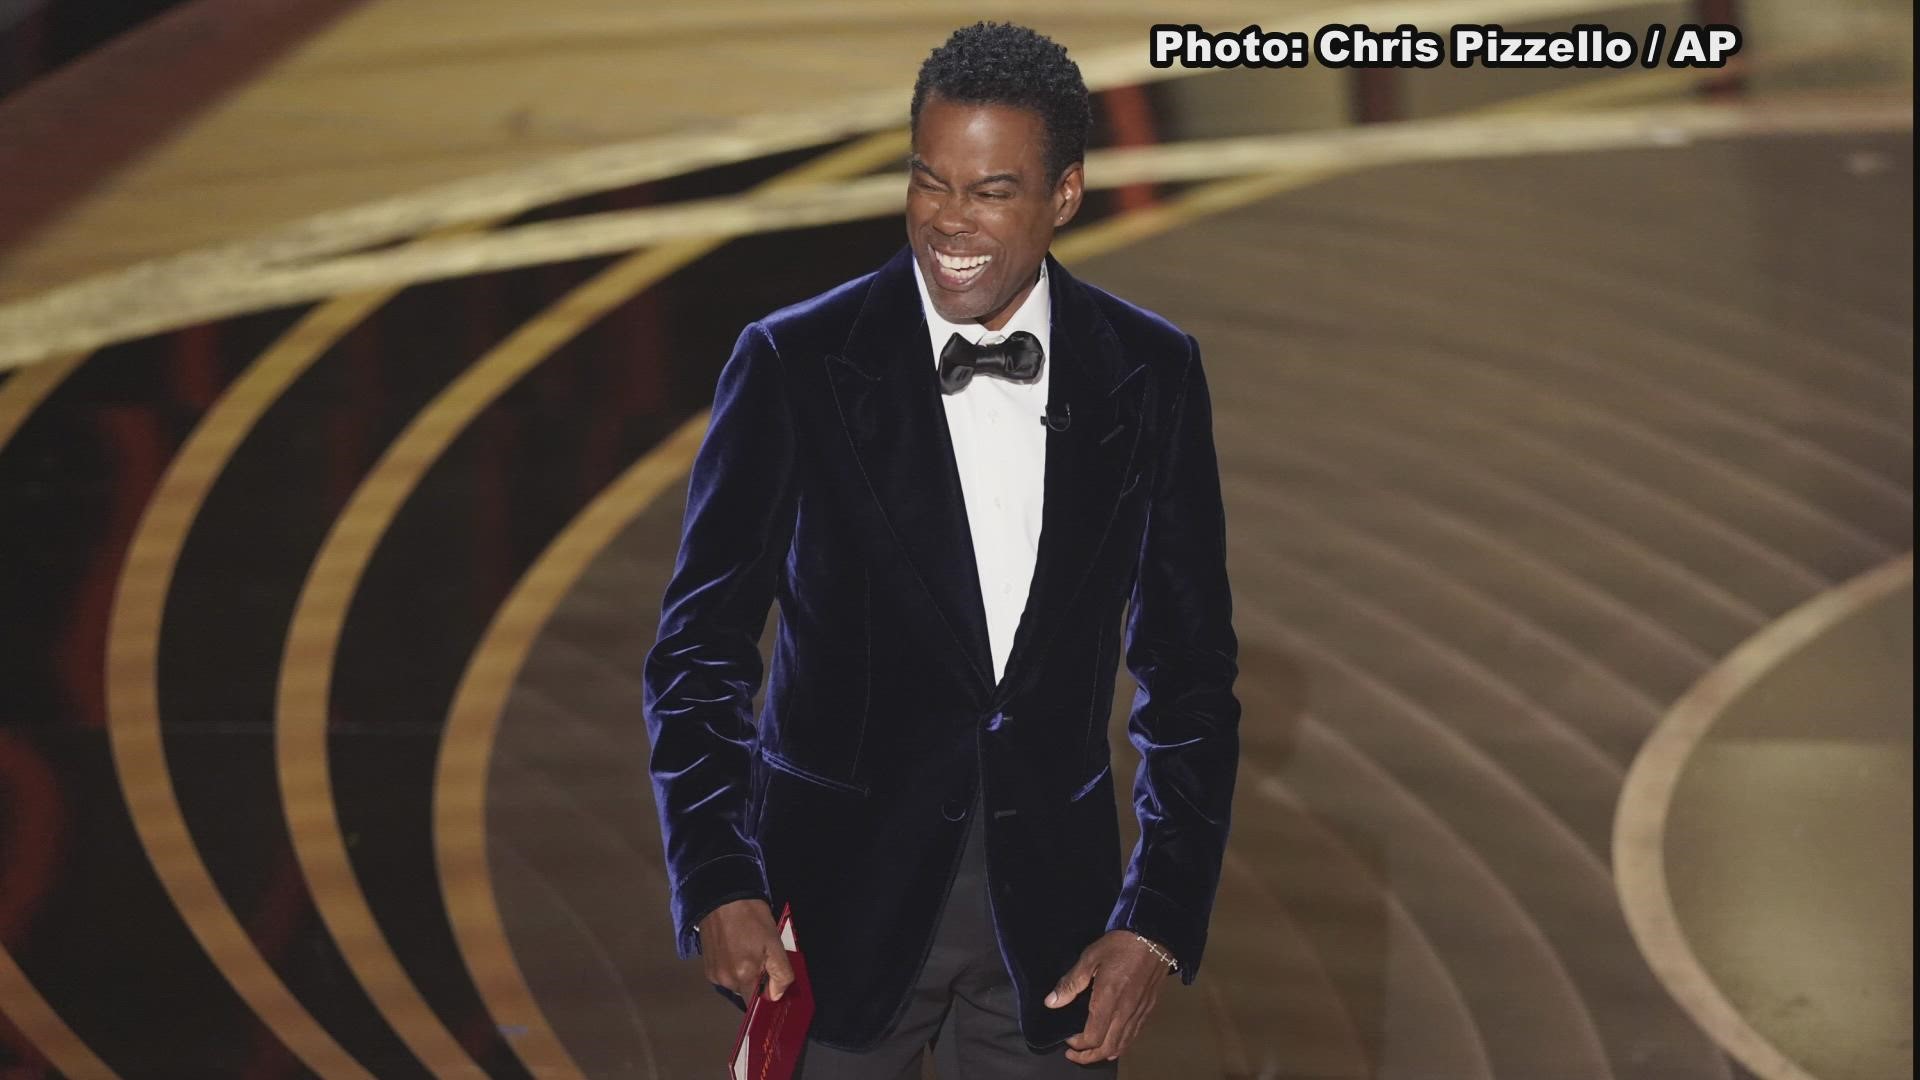 Here are images of the moment Will Smith smacked Chris Rock on stage at the Oscars.